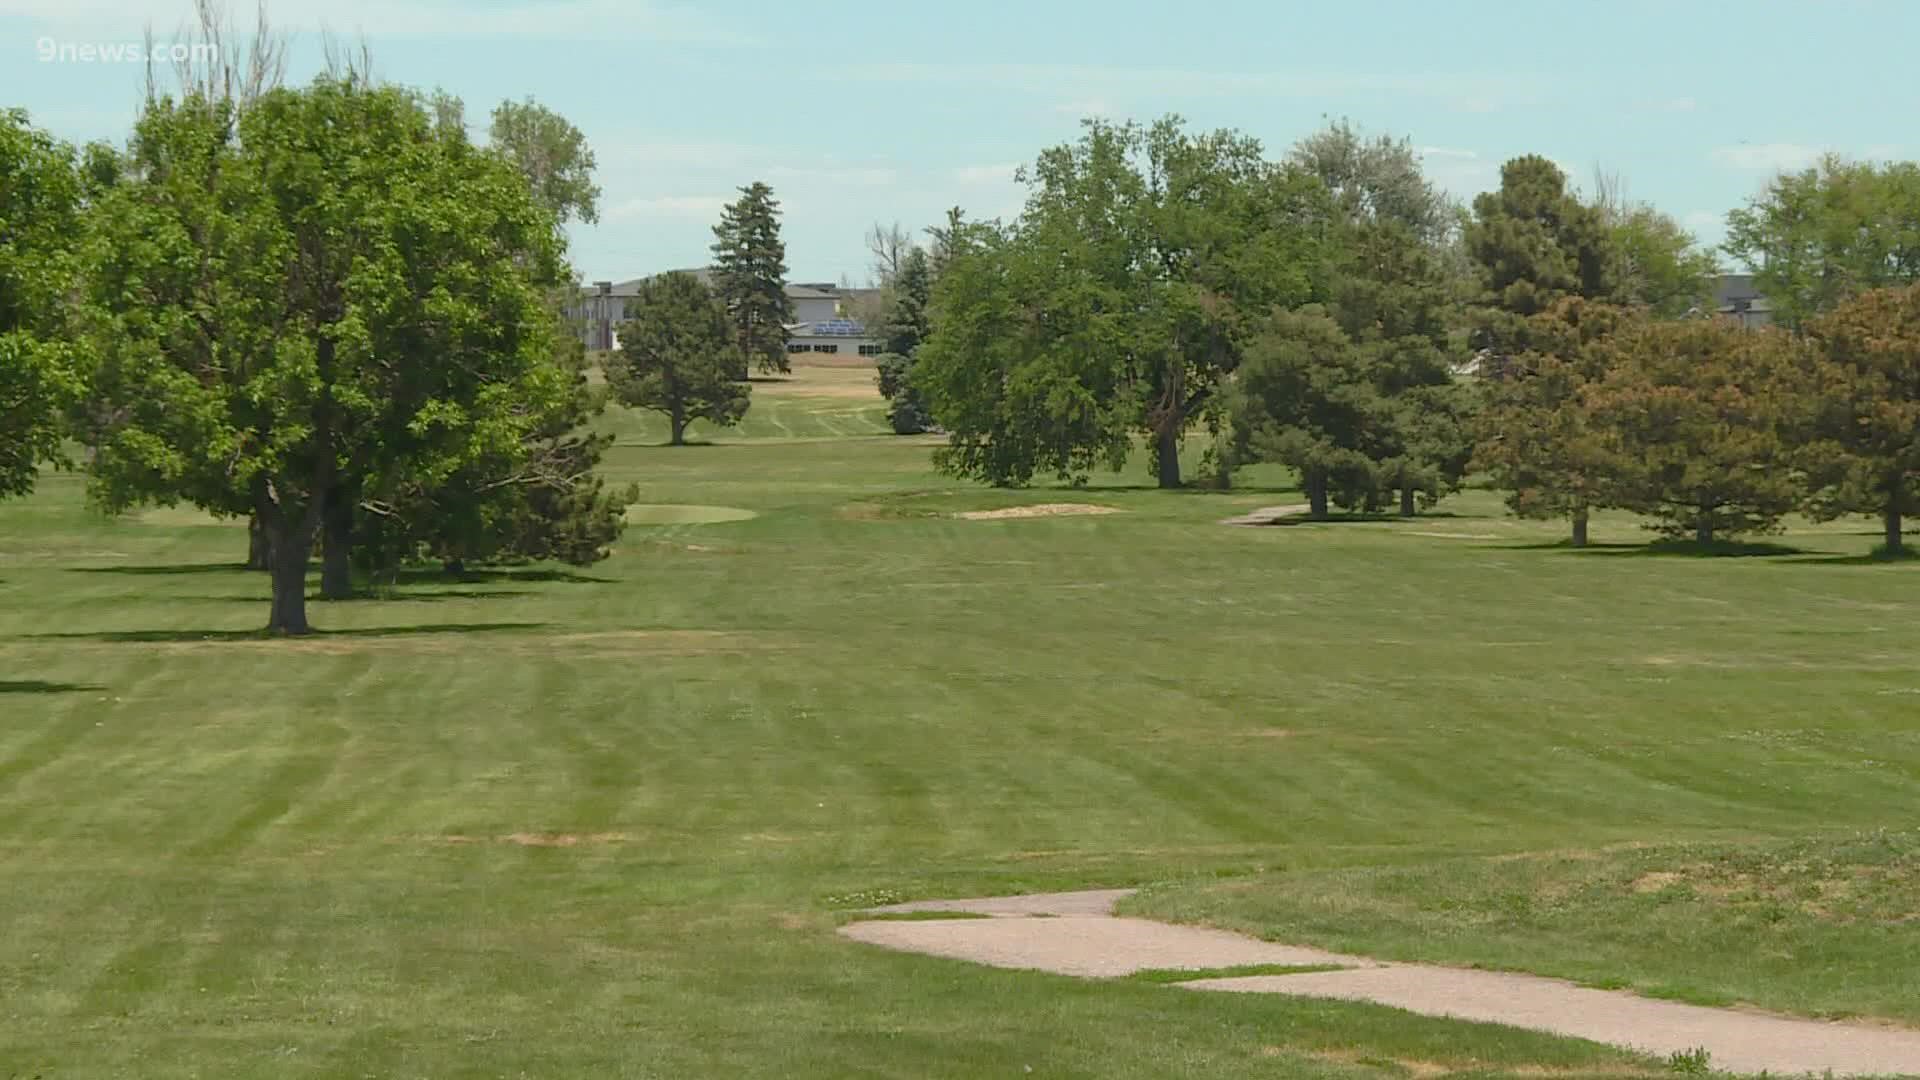 Denver unveiled their vision for the 155-acre parcel that is one of the last large undeveloped properties in the city.